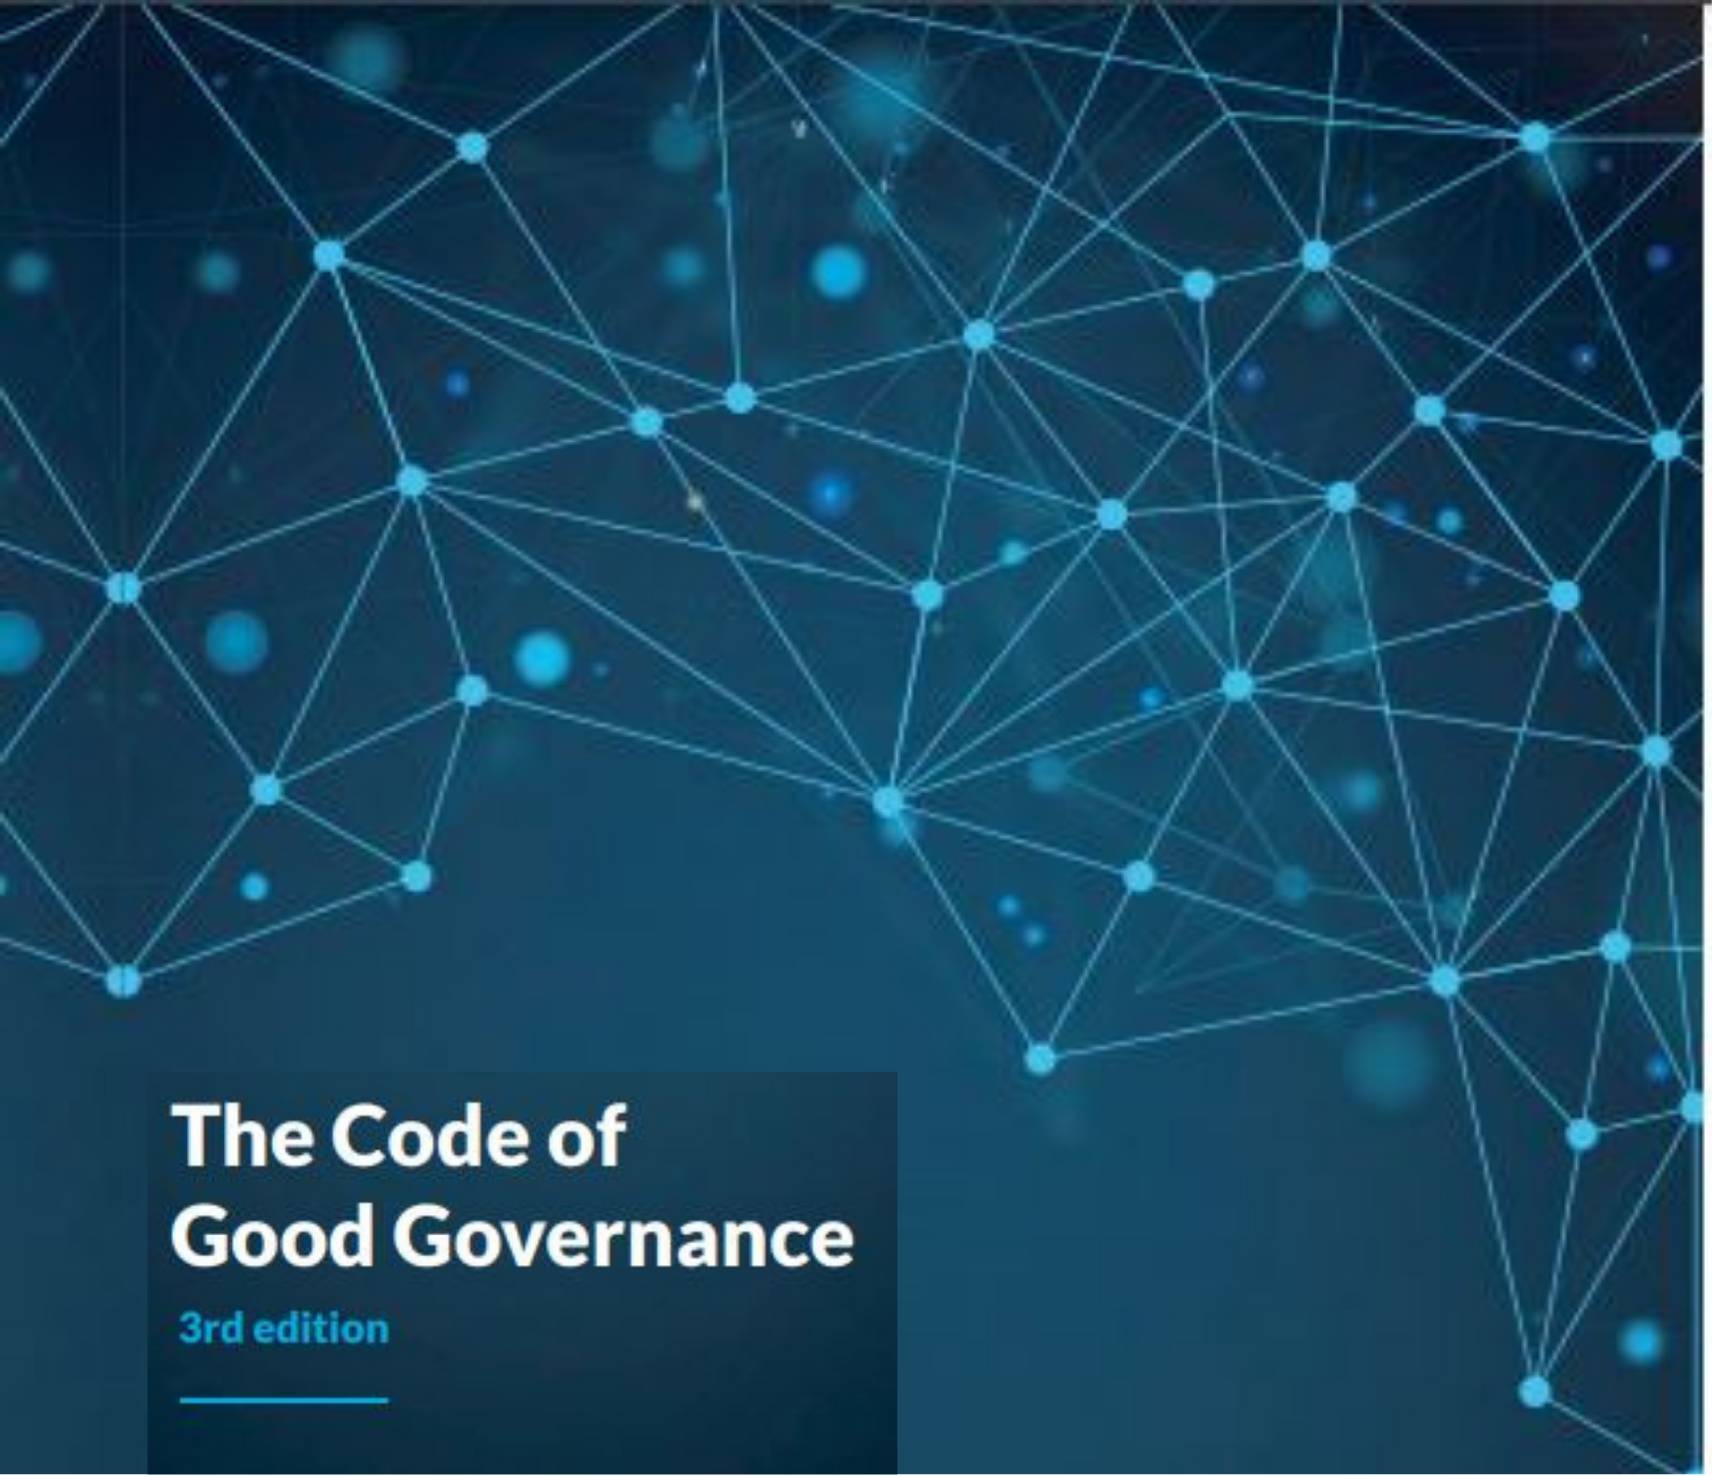 The Code of Good Governance